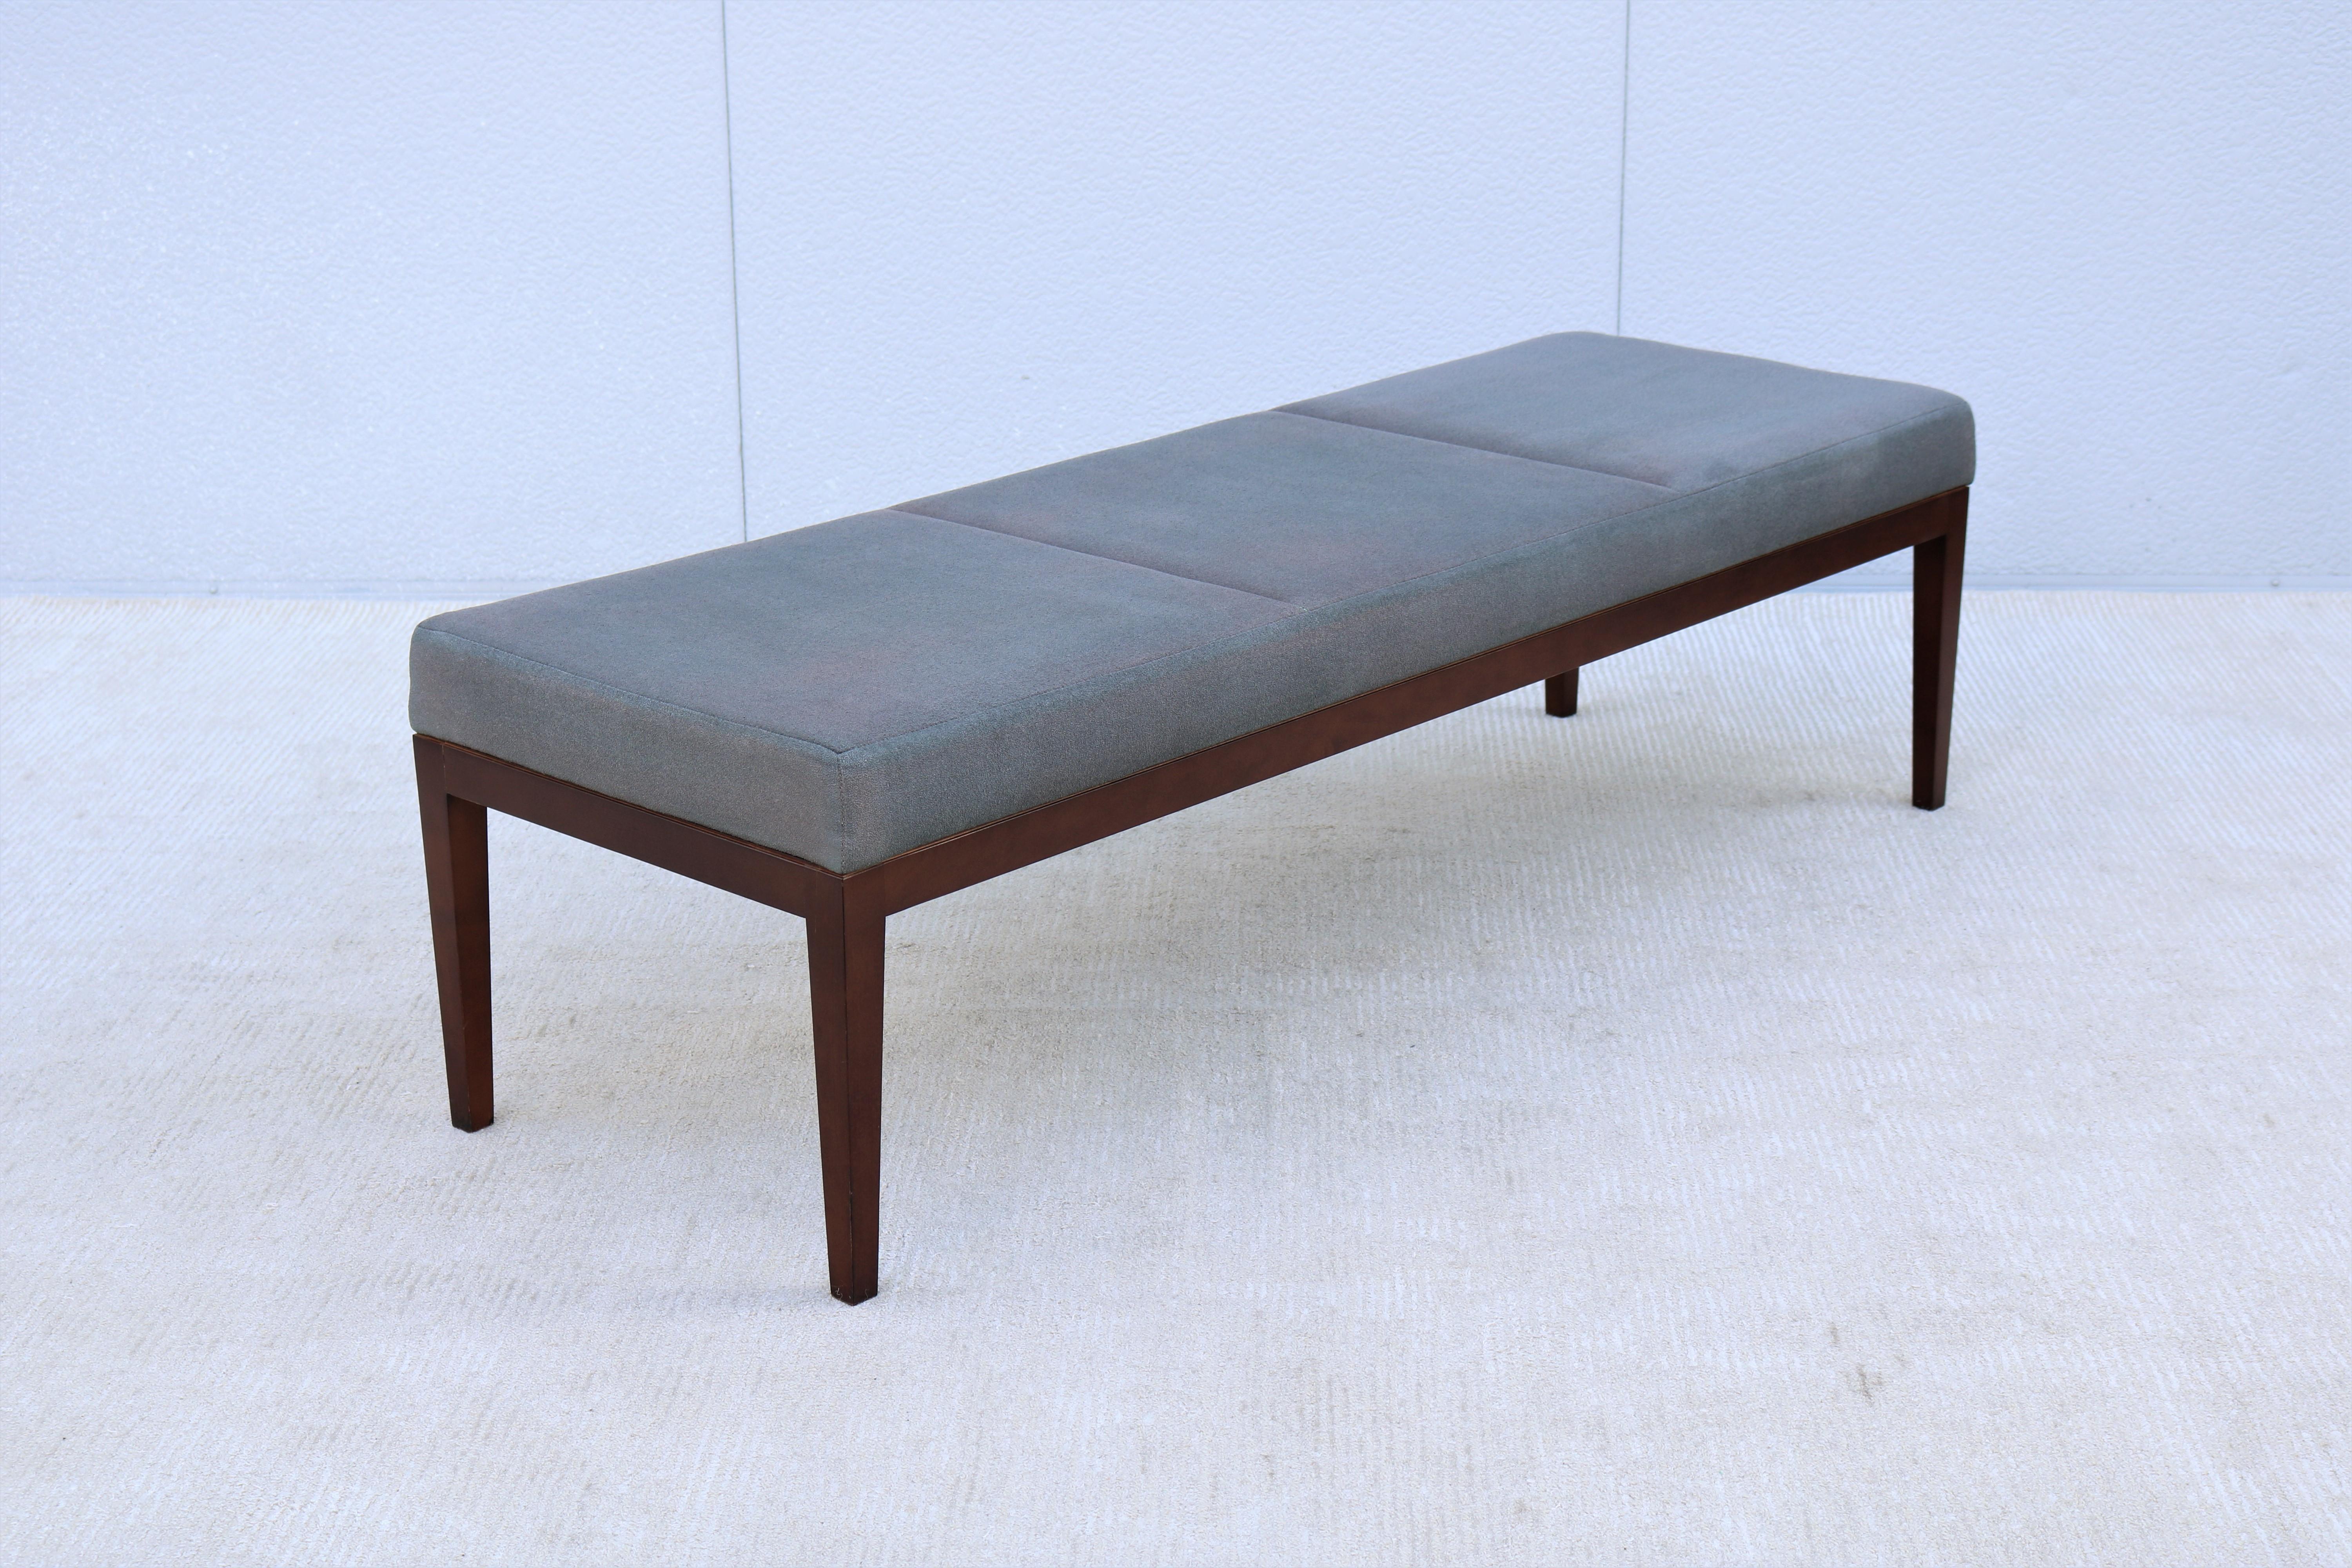 Lacquered Contemporary Modern Gary Lee Partners for Cumberland Rectangular Livy Bench